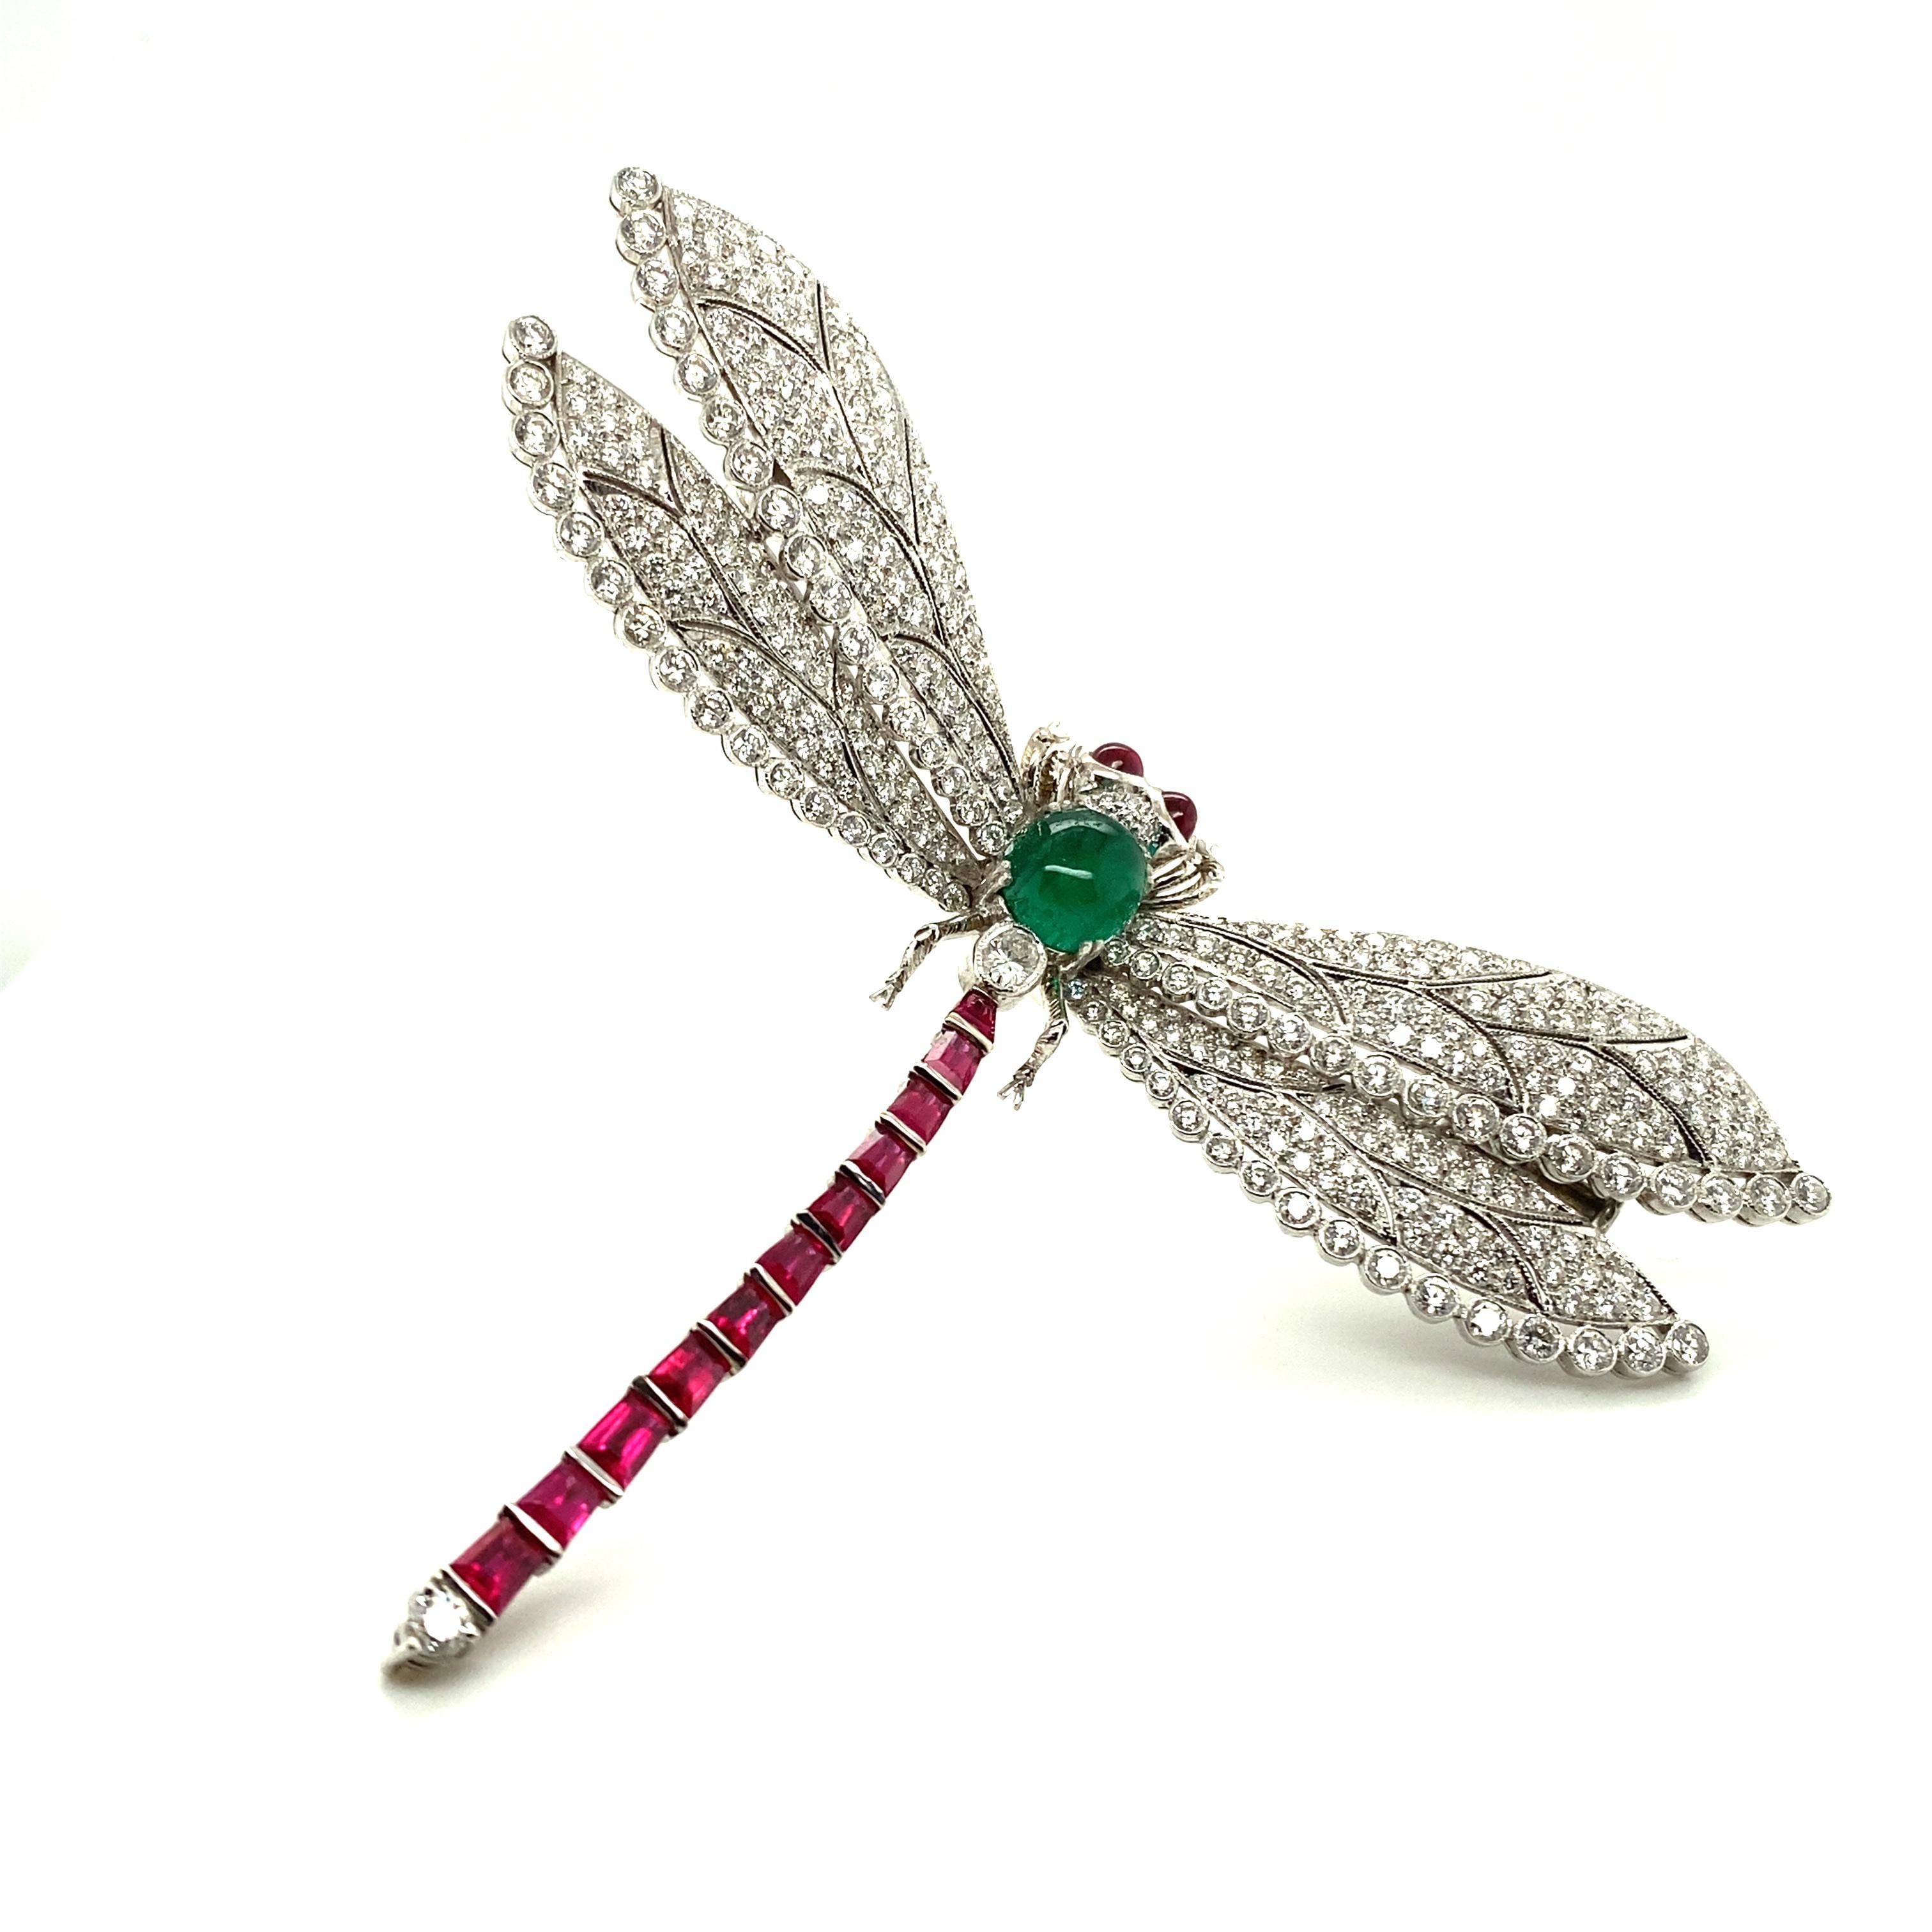 Brilliant Cut Spectacular Art Deco Style Dragonfly Brooch in 18 Karat White Gold